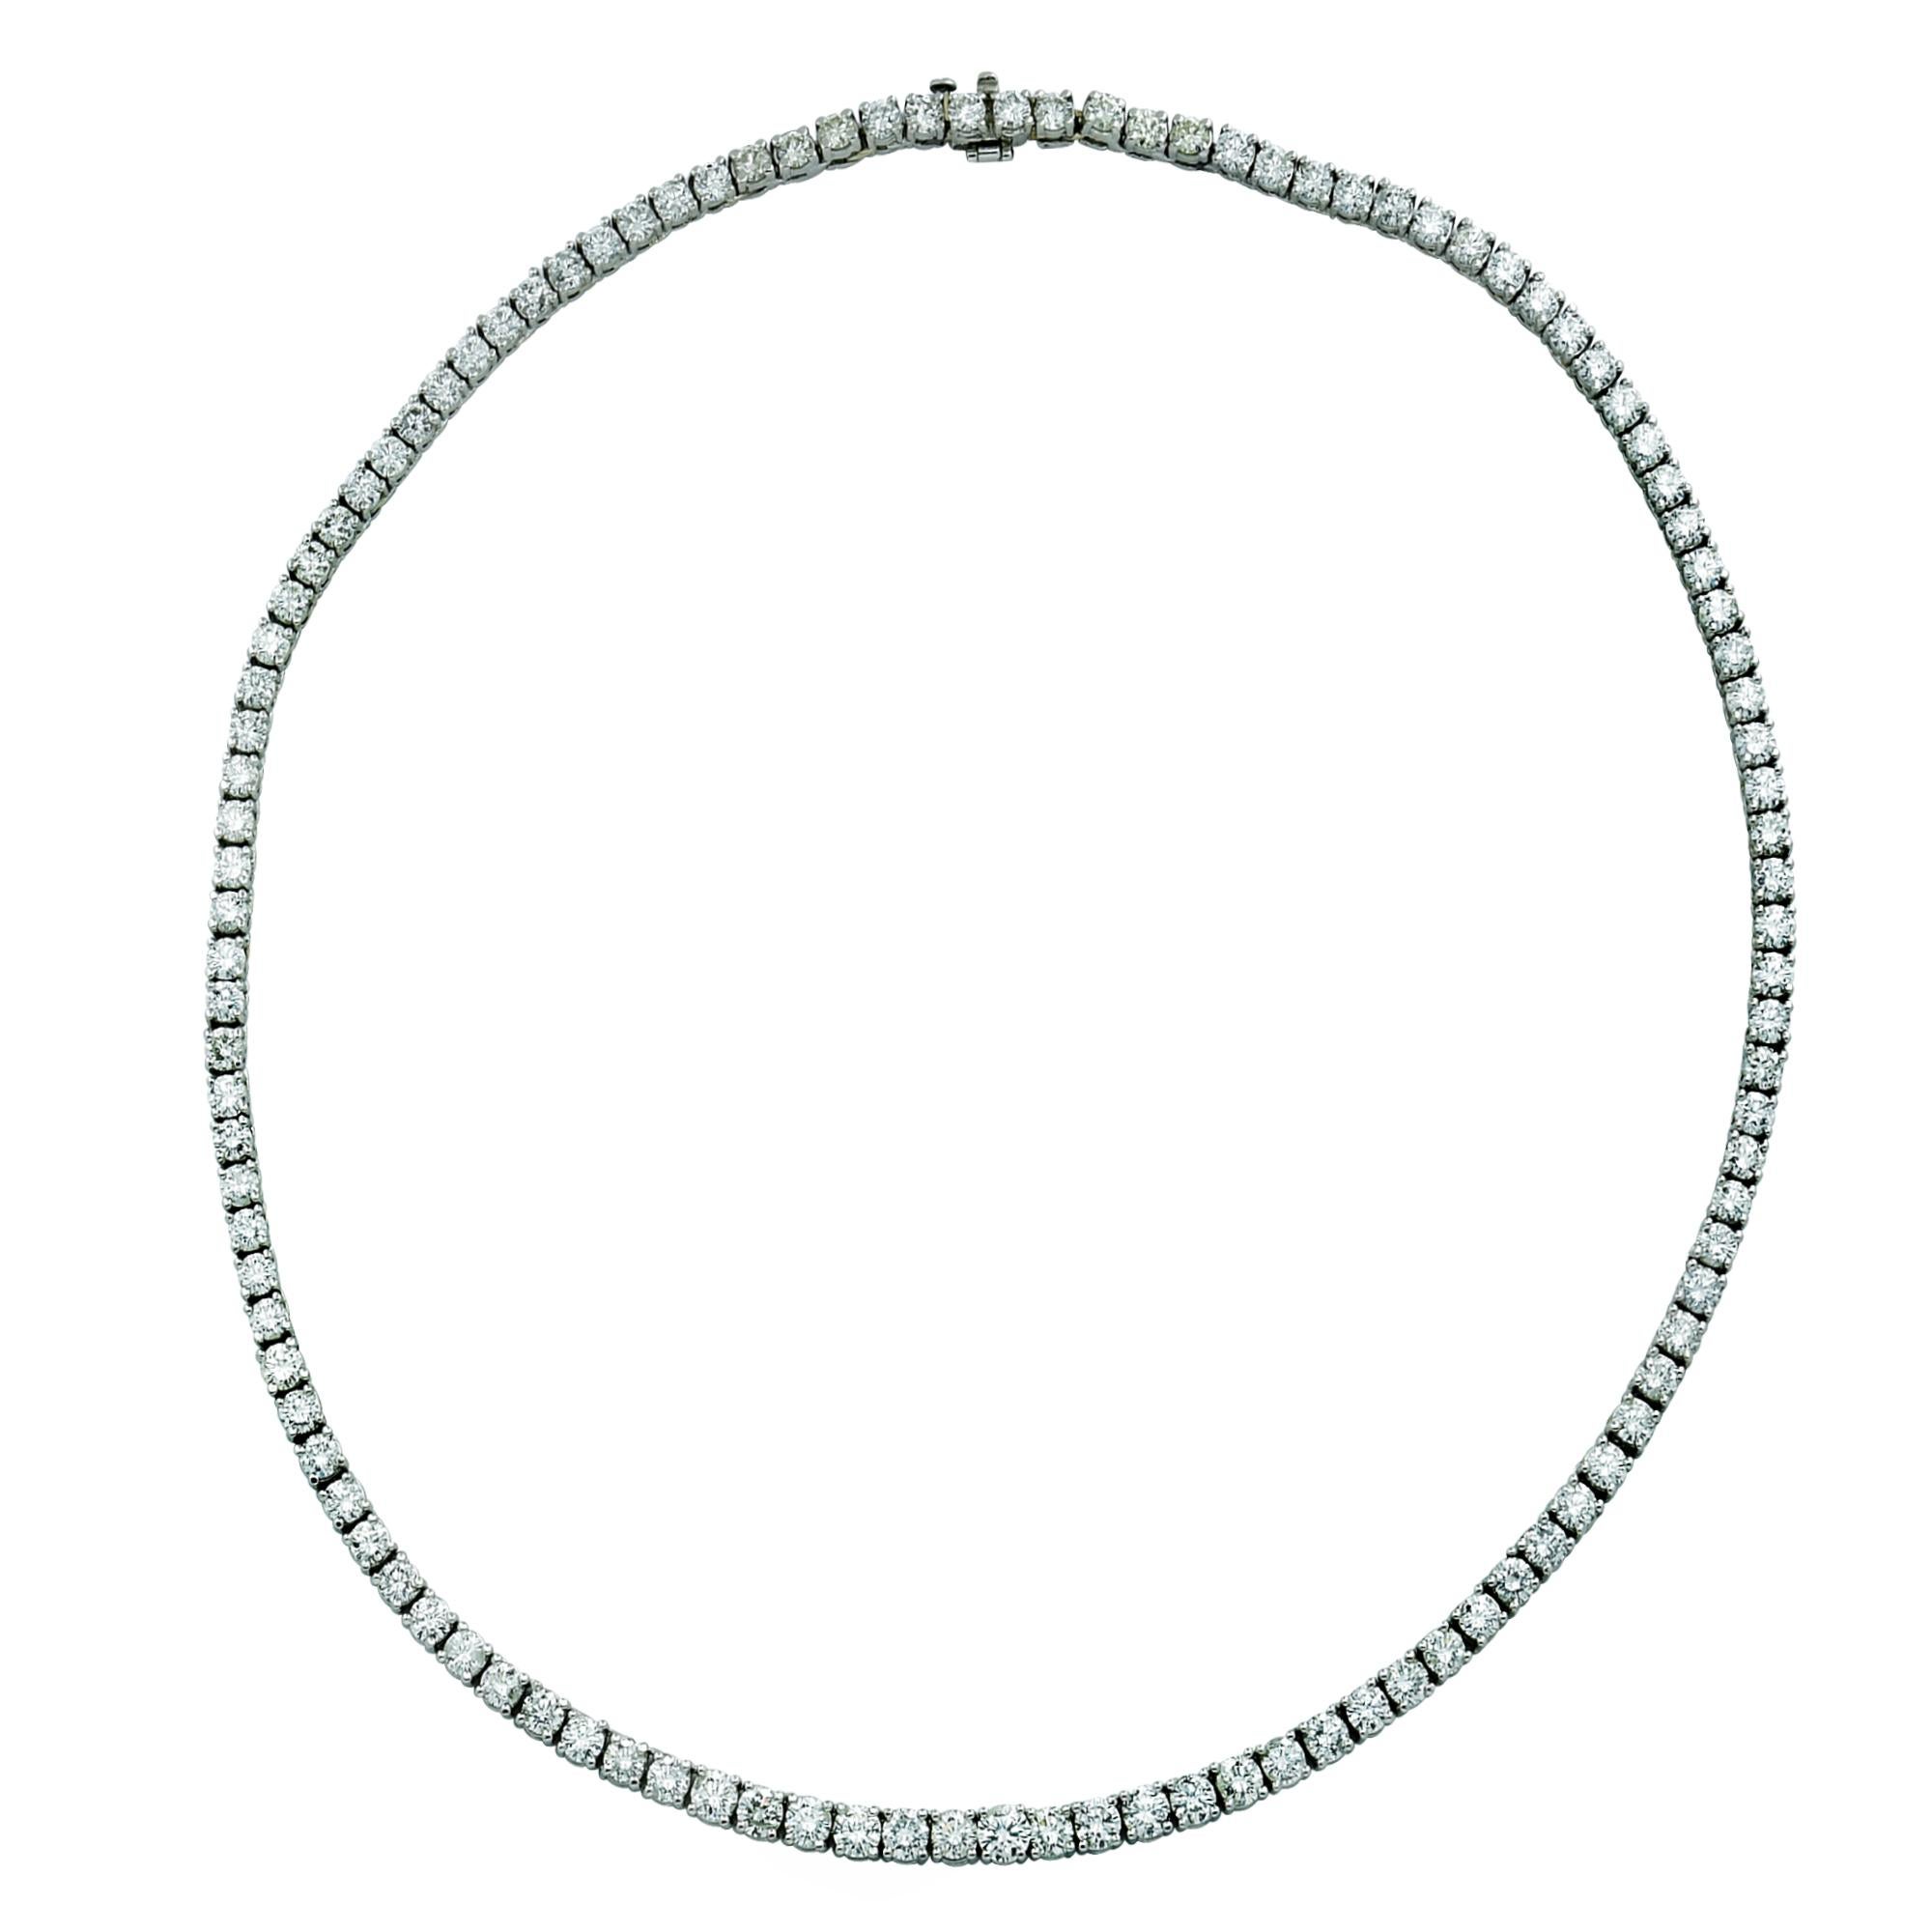 Exquisite Diamond necklace featuring 112 round brilliant cut diamonds weighing approximately 20 carats G-I color and SI1-I1 clarity seamlessly set in platinum. This sensational necklace measures 18.5 inches in length and .4 inches in width.

Our